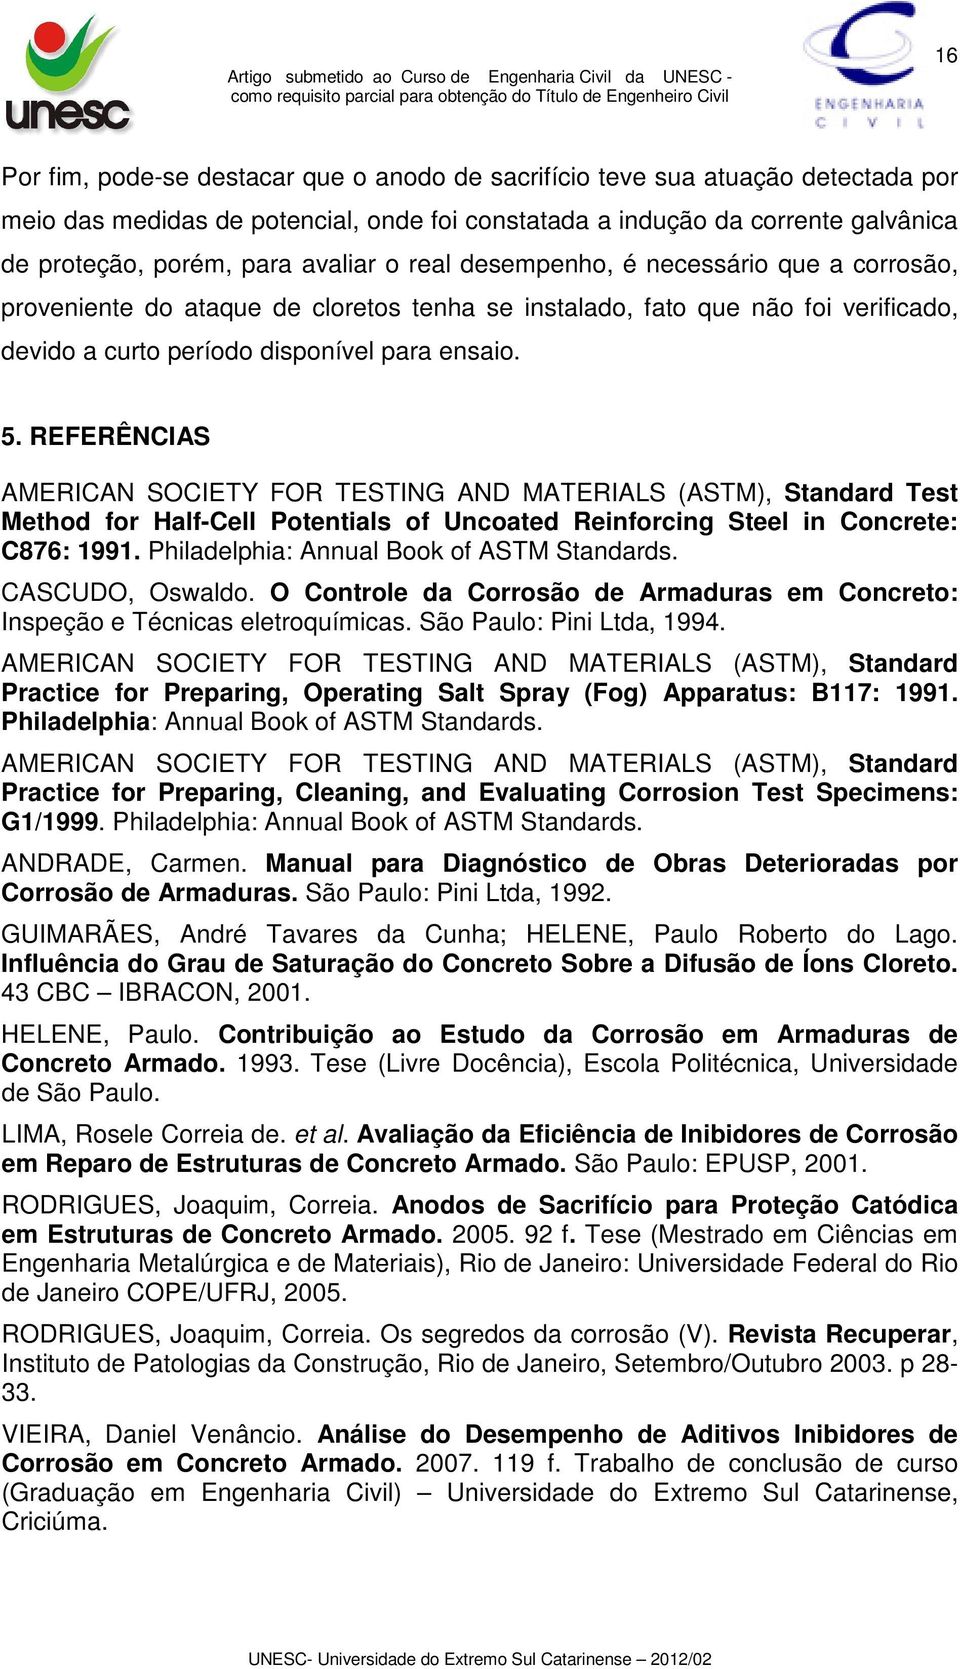 REFERÊNCIAS AMERICAN SOCIETY FOR TESTING AND MATERIALS (ASTM), Standard Test Method for Half-Cell Potentials of Uncoated Reinforcing Steel in Concrete: C876: 1991.